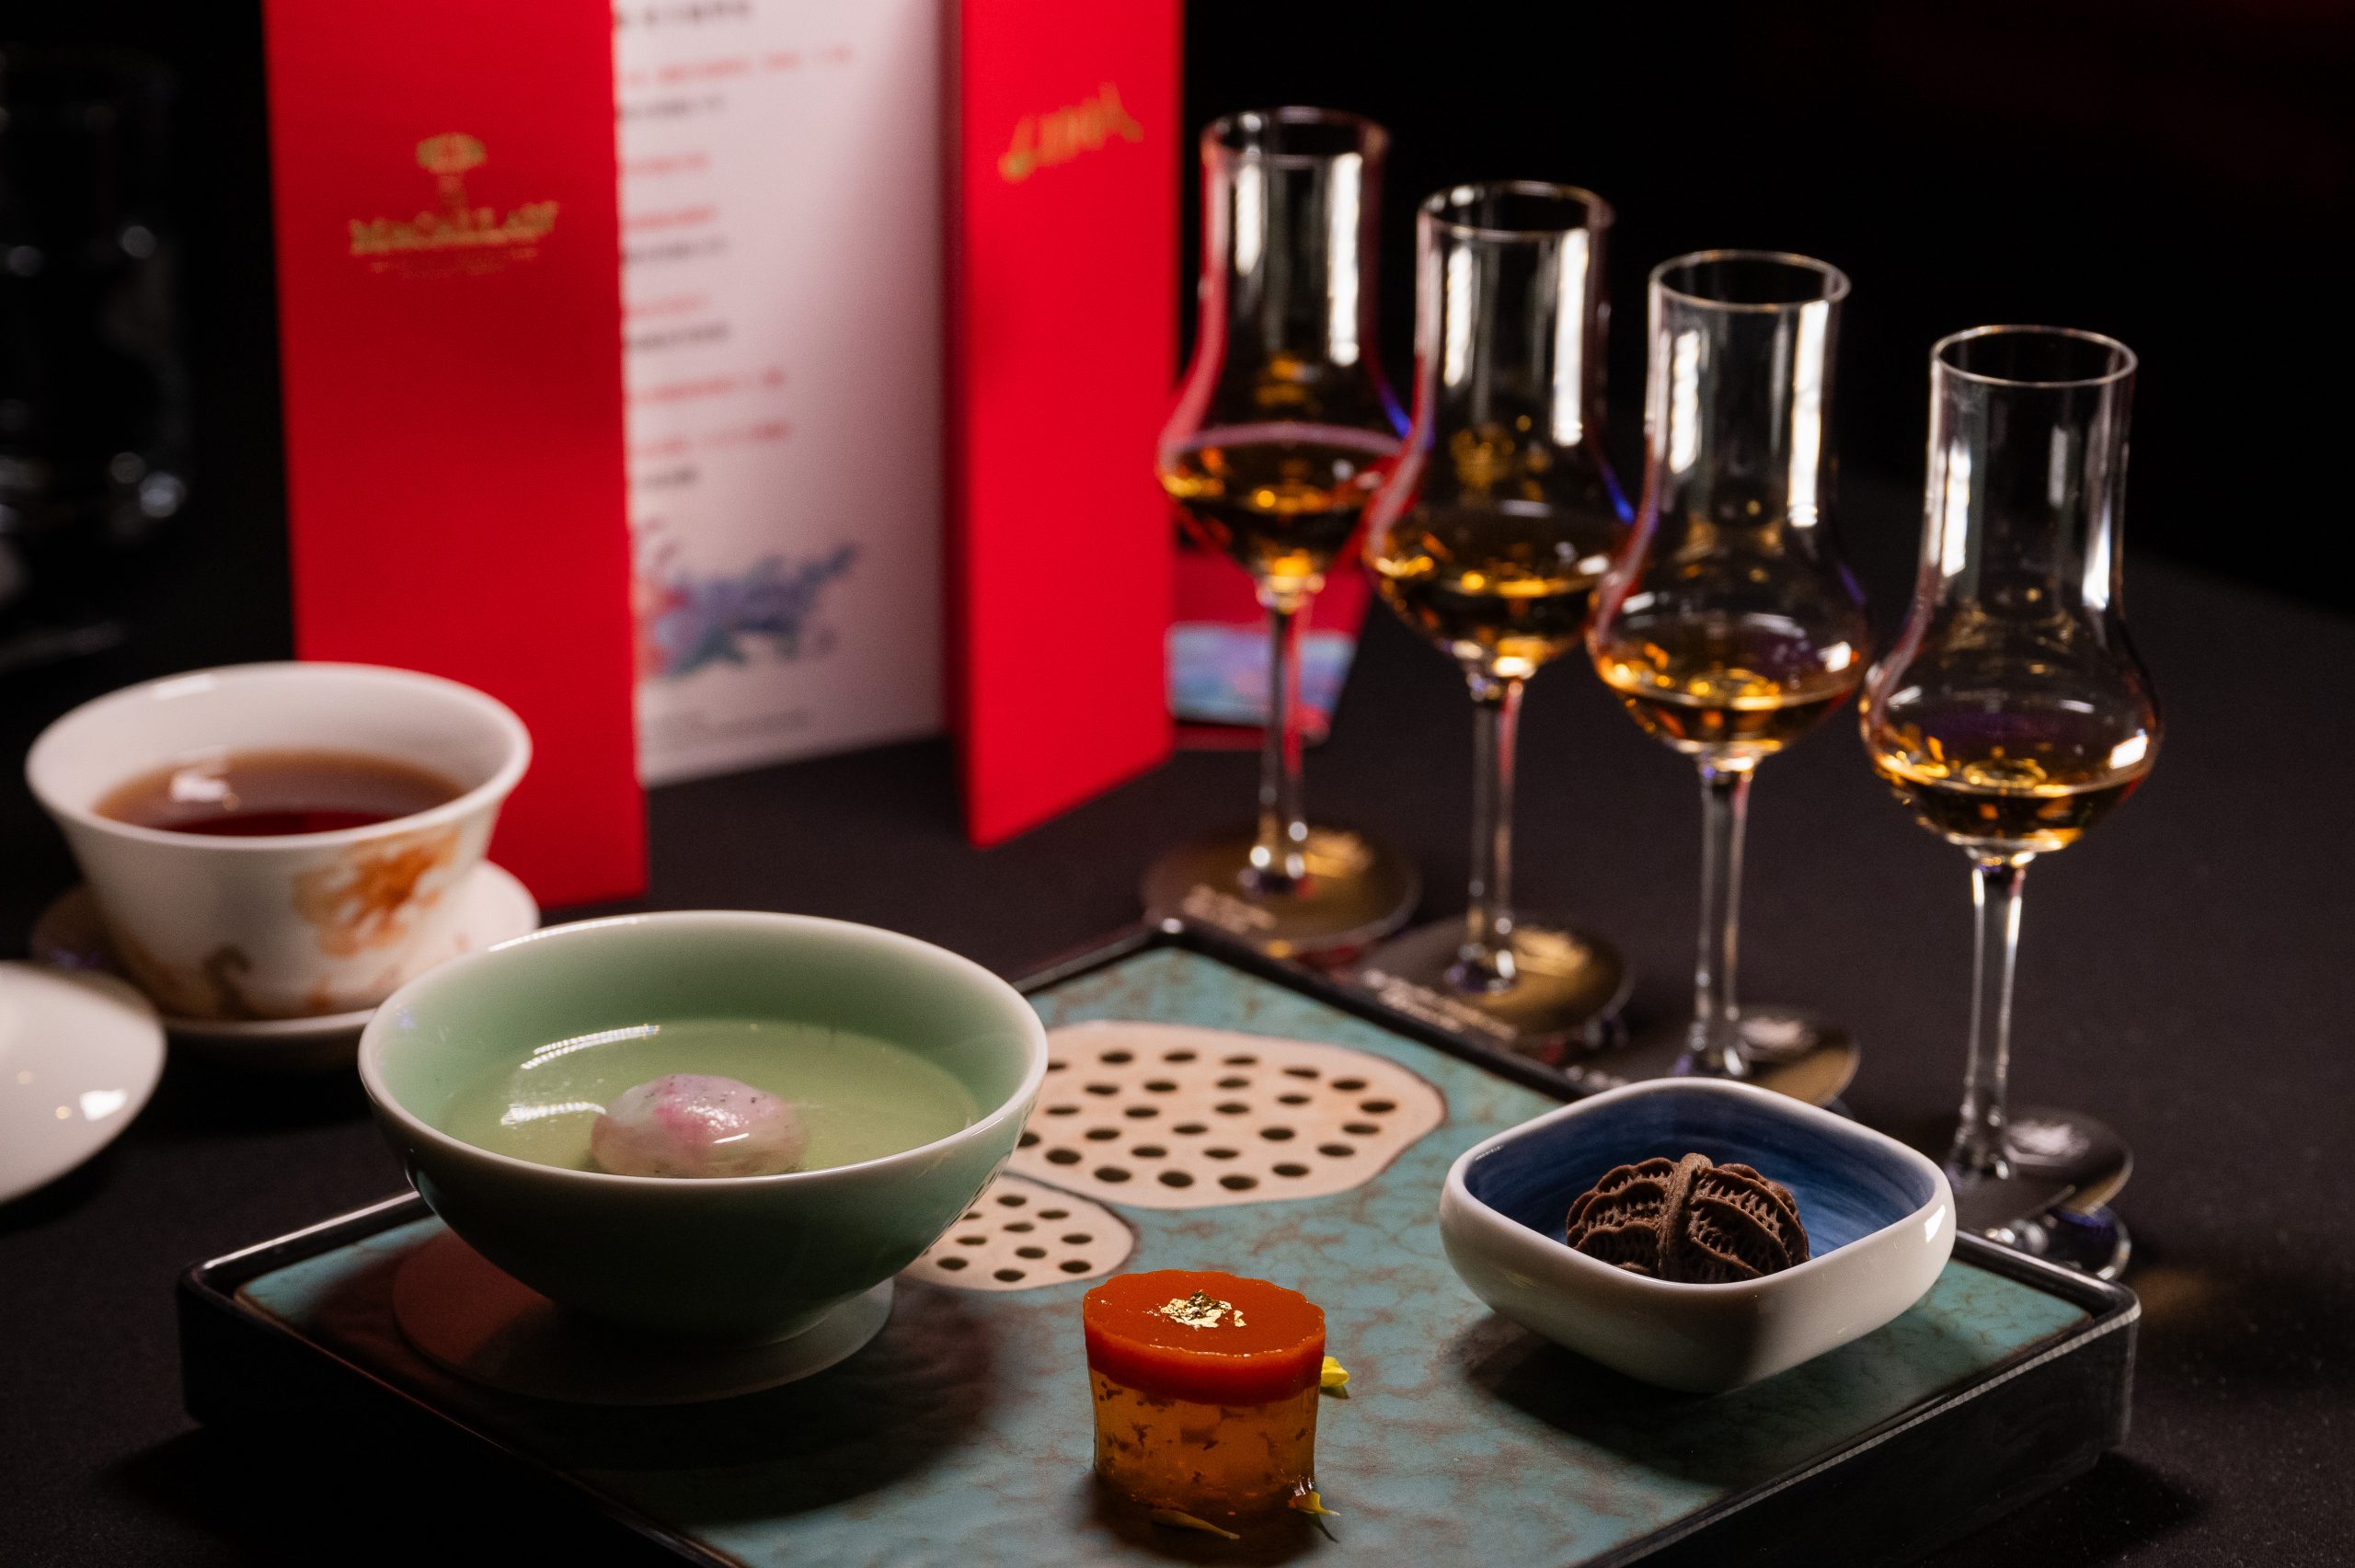 The Macallan Litha whisky pairing experience